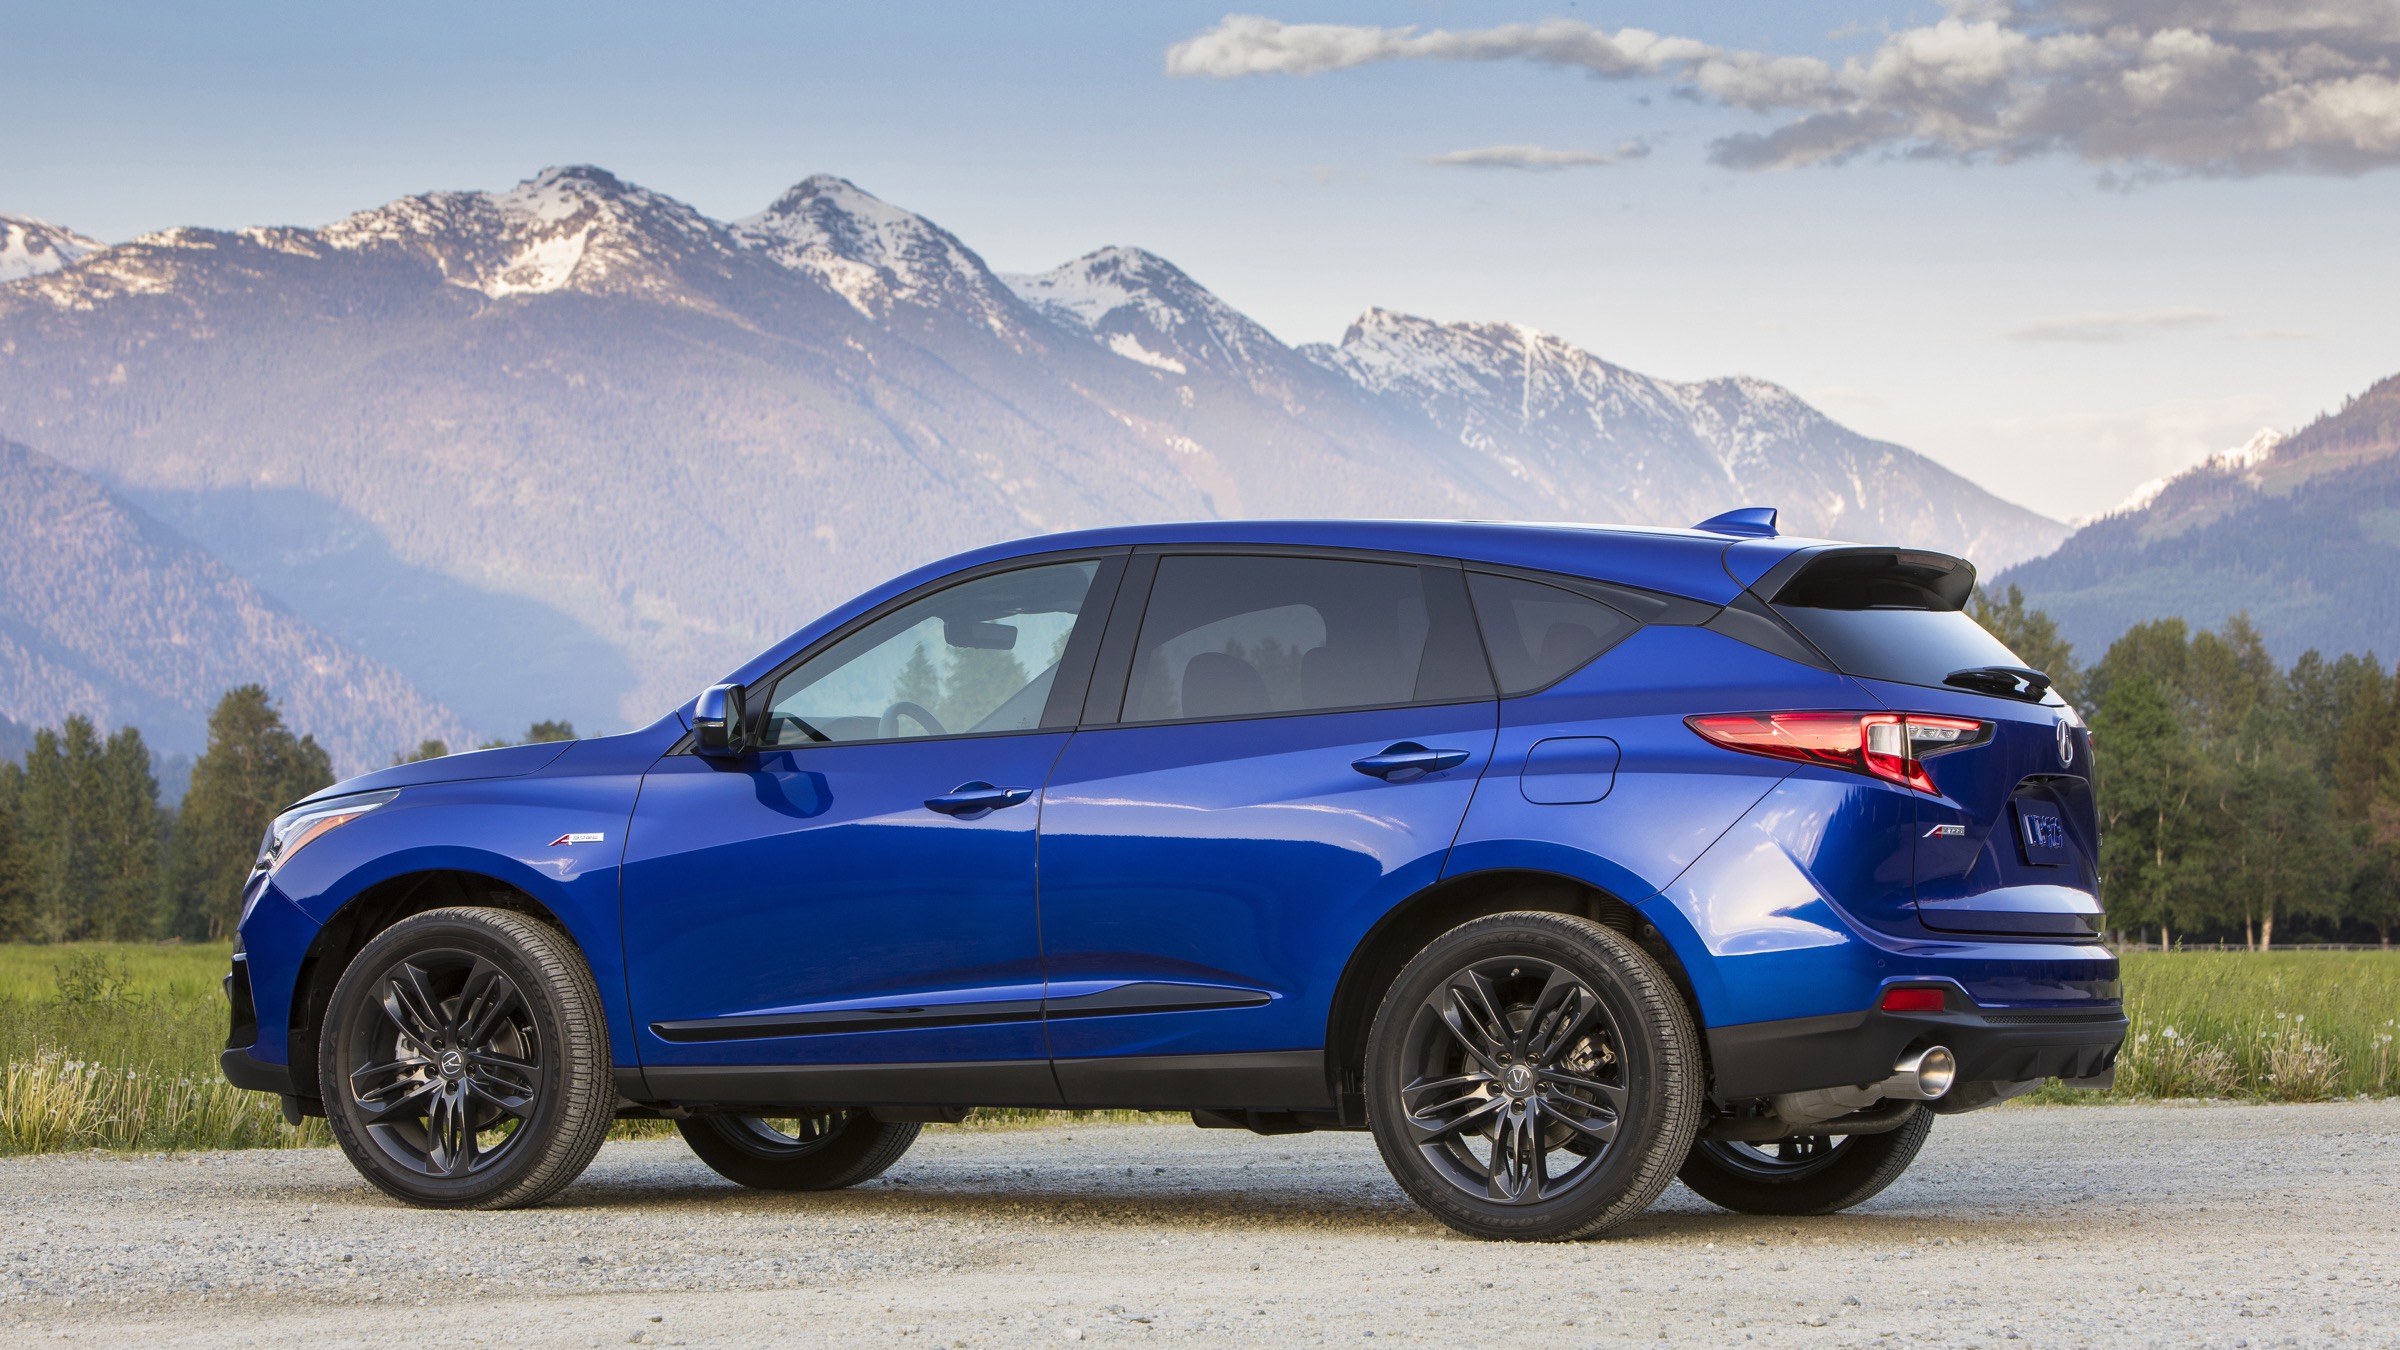 2020 Acura RDX Review and Buying Guide | Specs, features ...